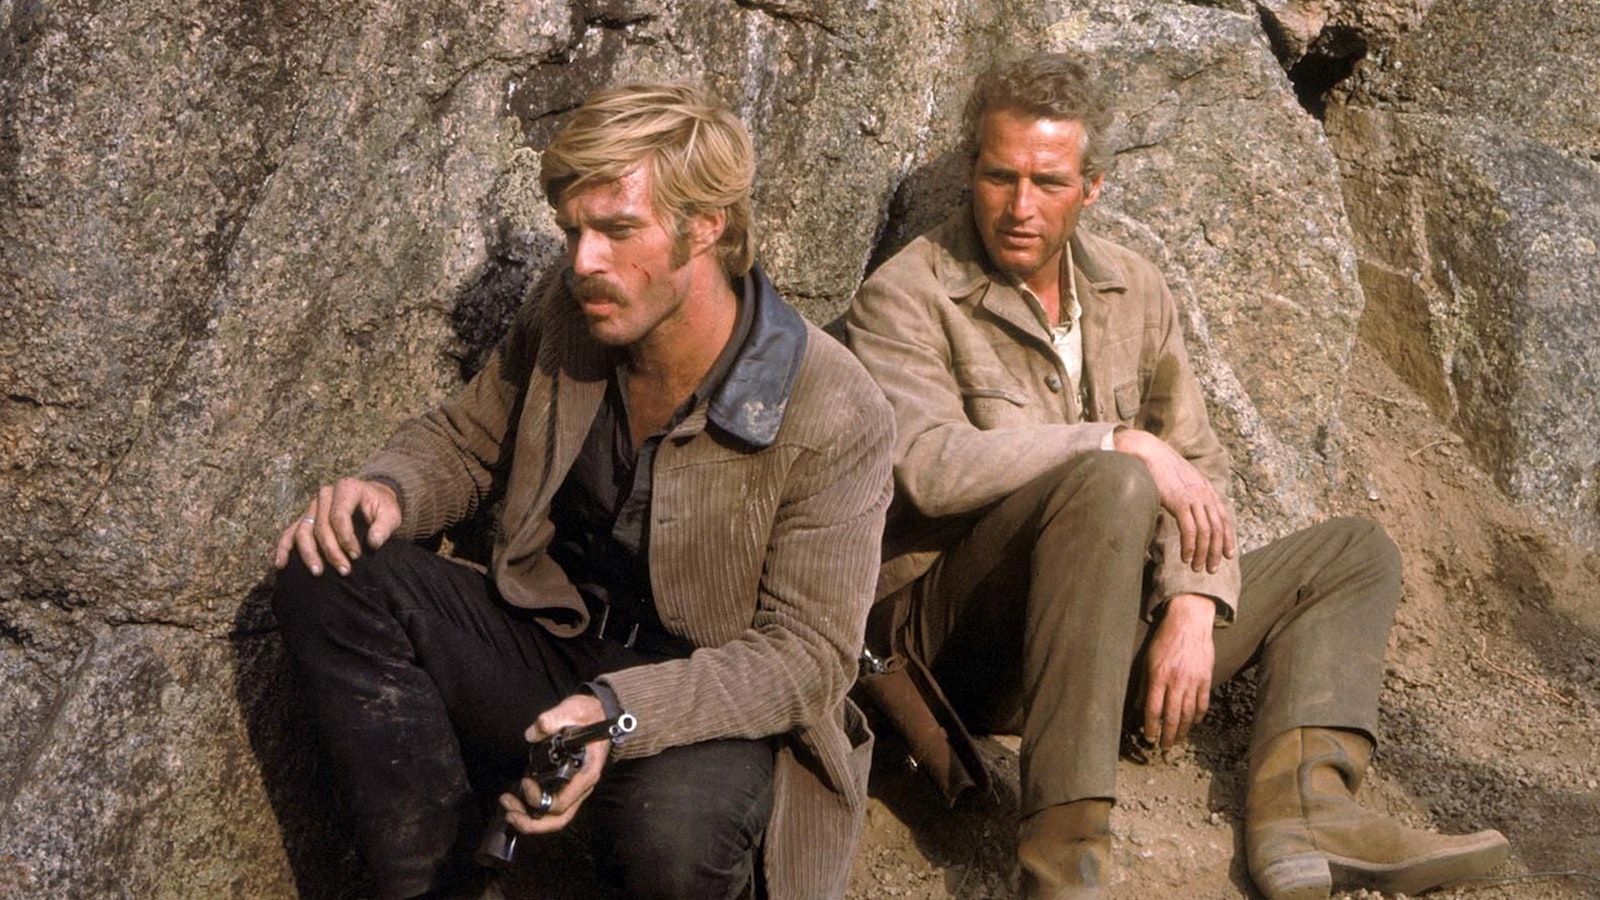 Robert Redford as The Sundance Kid and Paul Newman as Butch Cassidy.